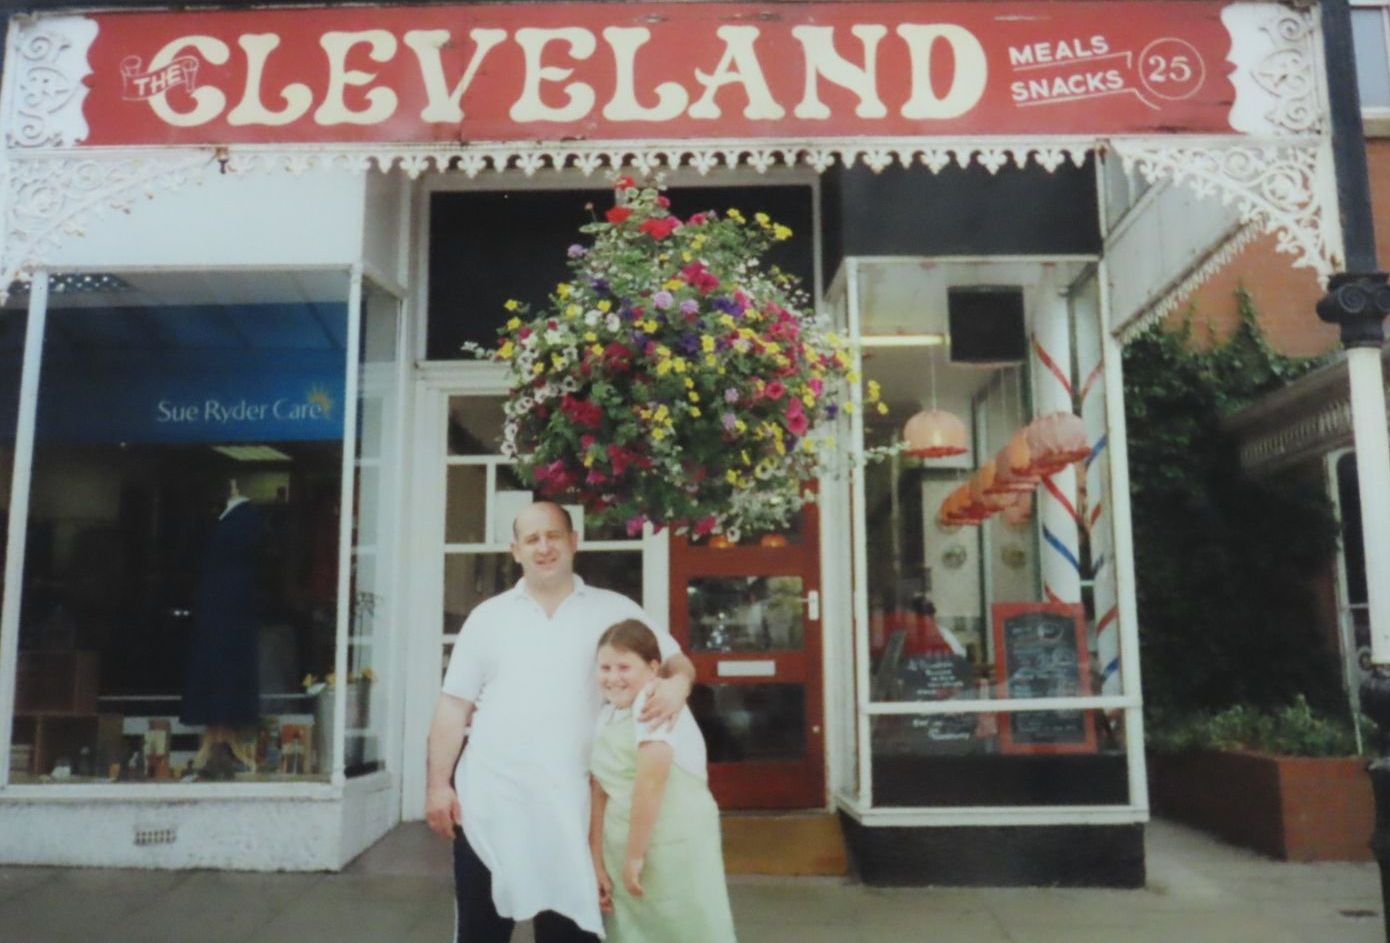 Paul McDonald with daughter Steph, then aged 7, outside the Cleveland Cafe on Lord Street in Southport in 2001